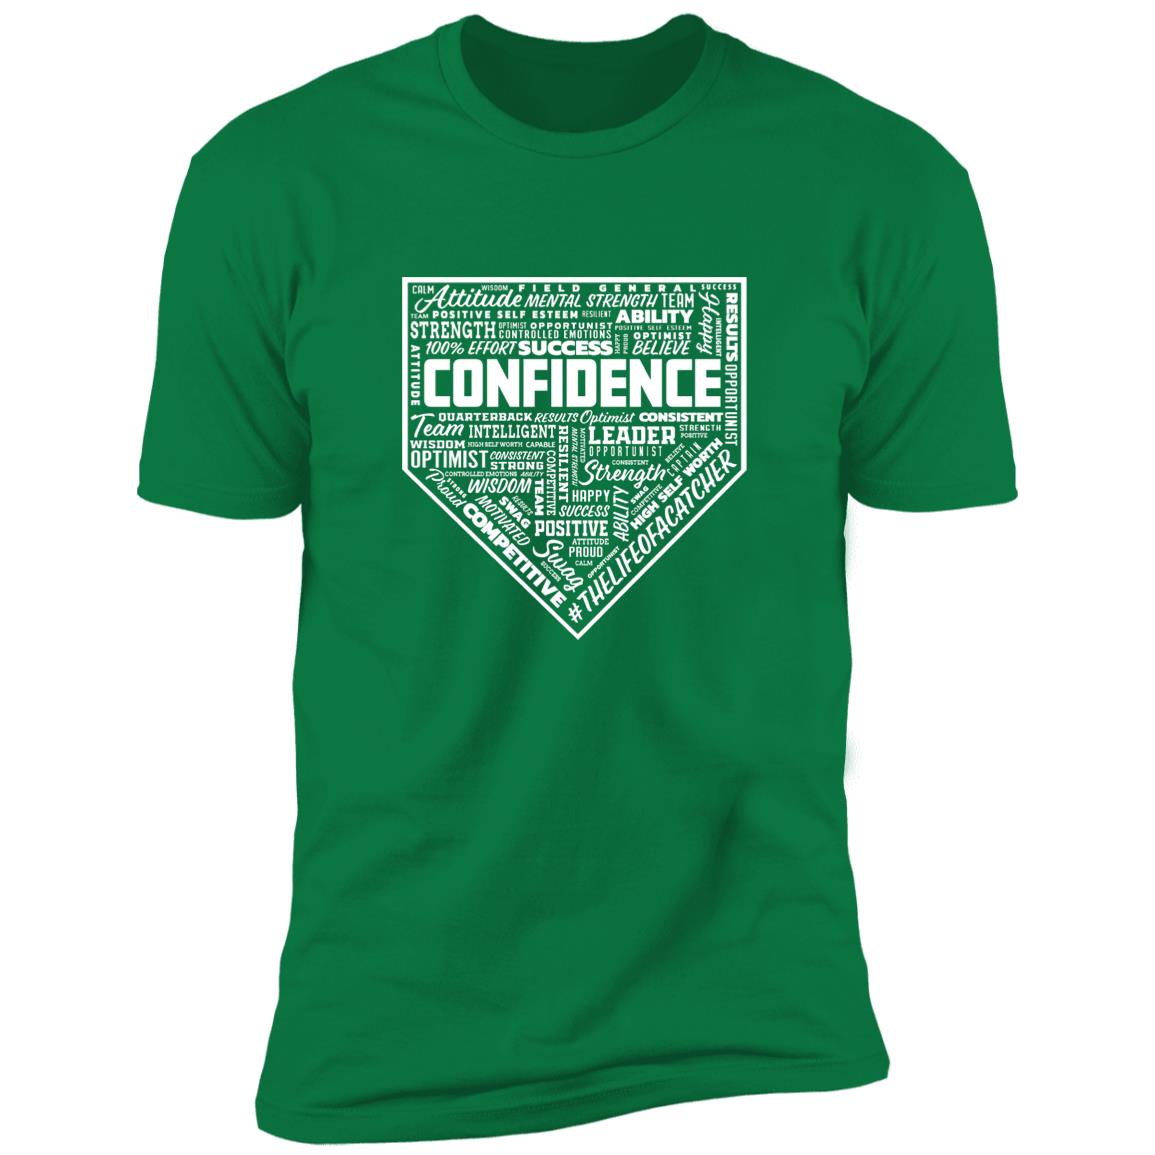 the catching guy confidence t-shirt mockup in green